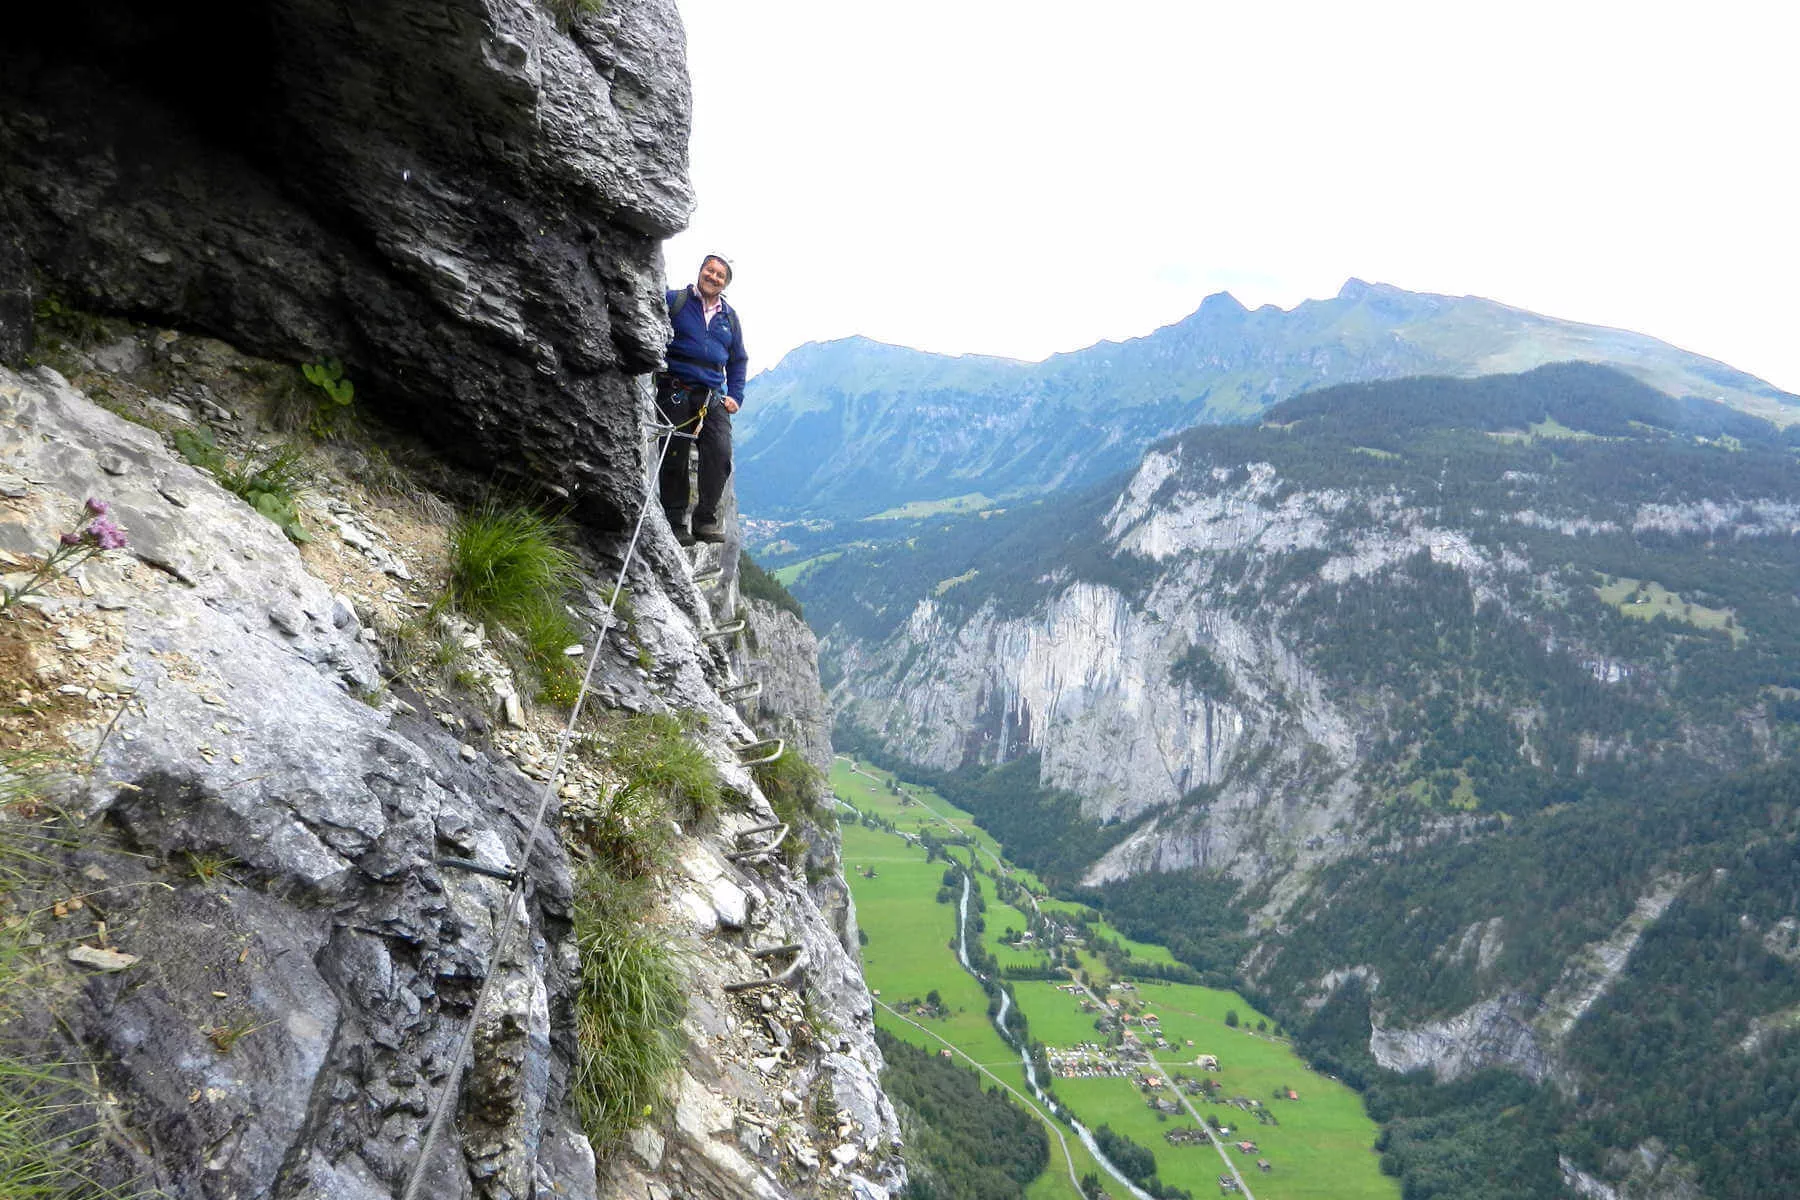 For the thrill of a lifetime in Switzerland, try hiking along a via ferrata, a mountain route with fixed cables, metal loops, and ladders